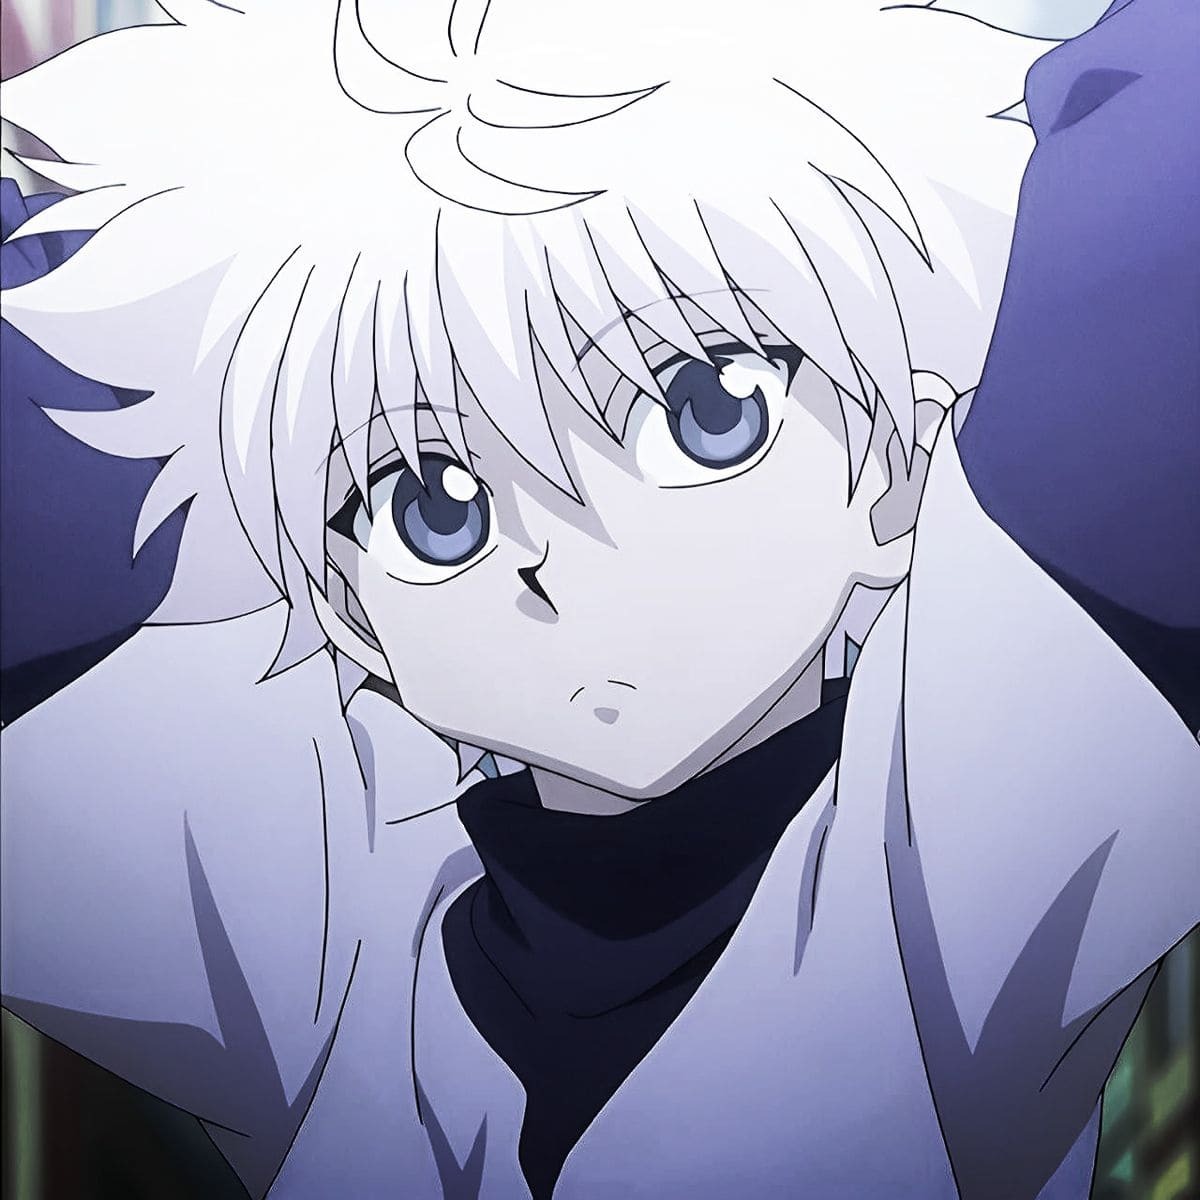 Capture of Killua looking straight ahead, hands behind his neck, relaxed and expressionless.